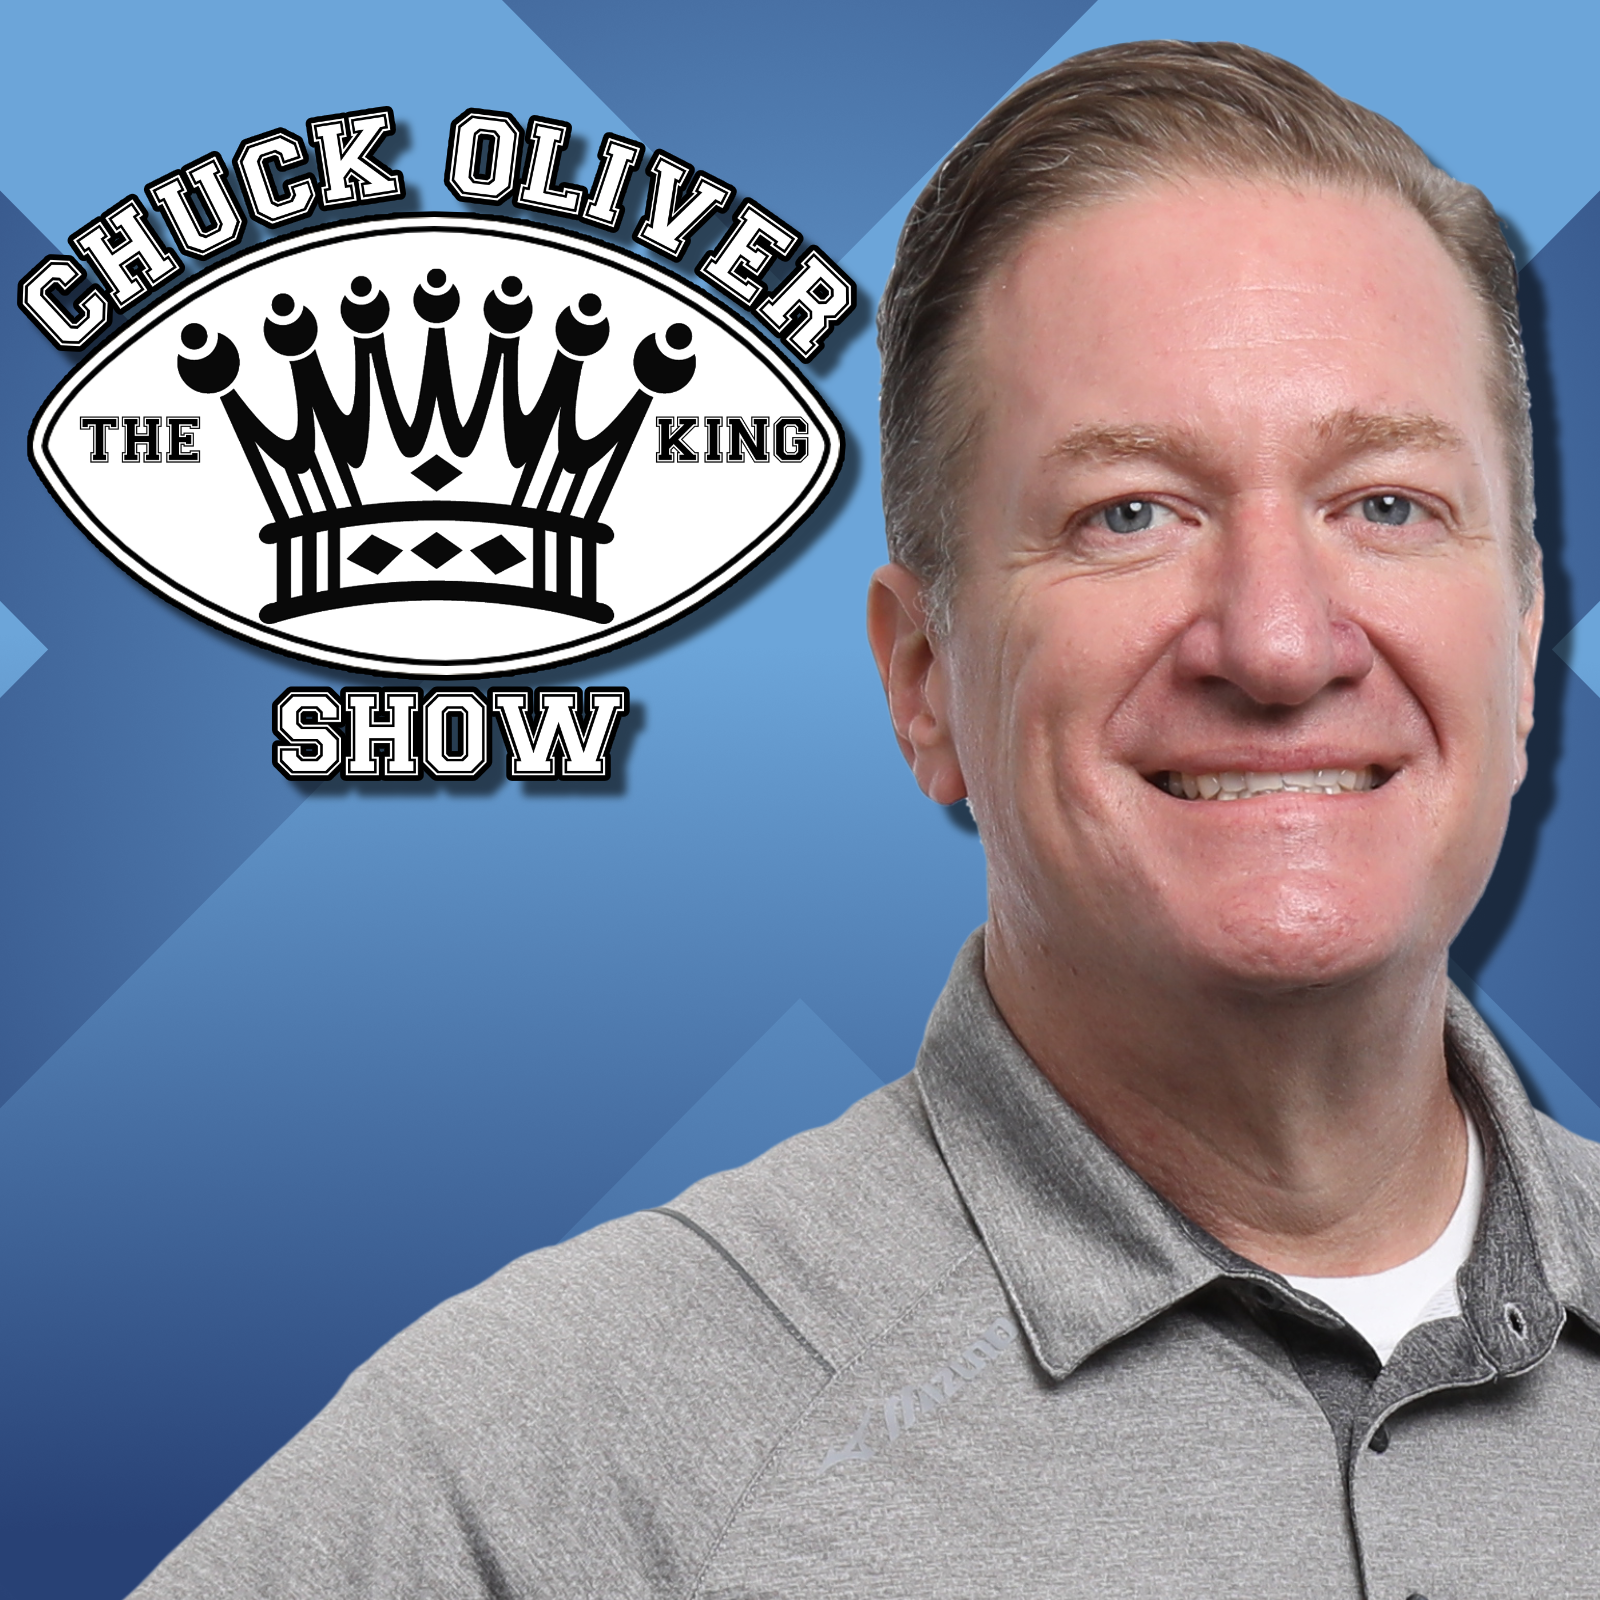 CHUCK OLIVER SHOW 3-8 FRIDAY HOUR 1